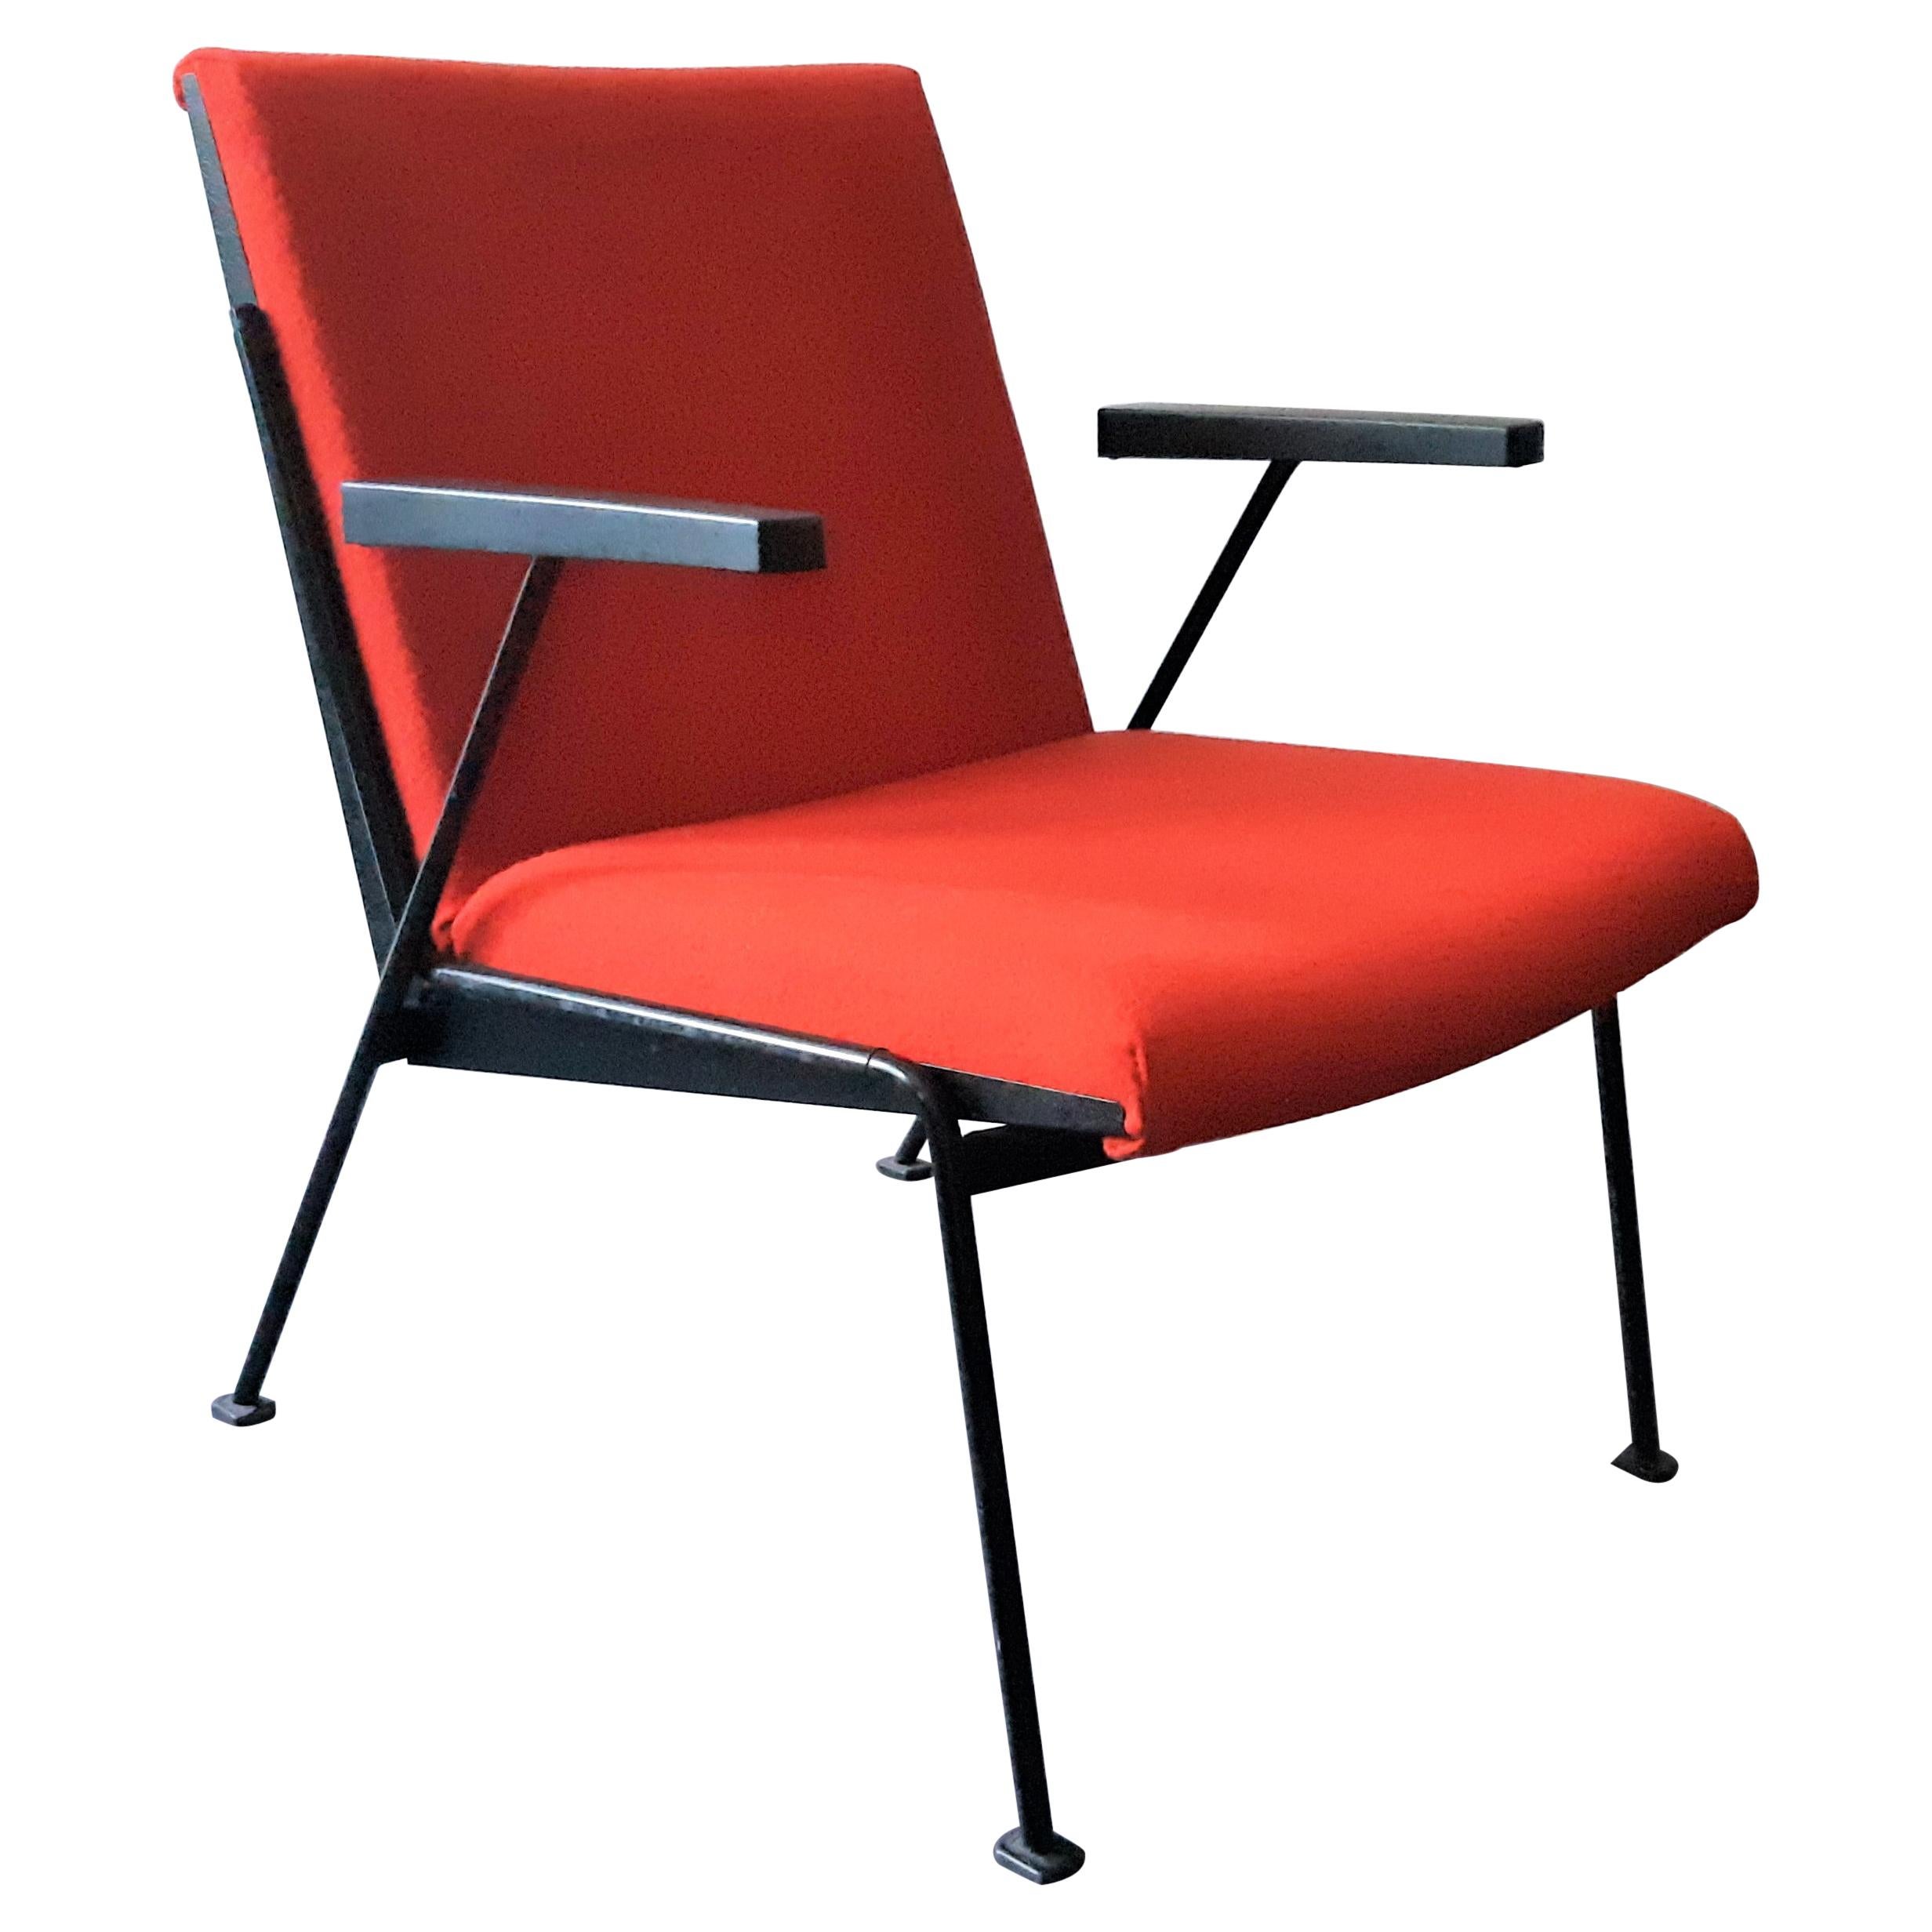 Red 'Oase' Lounge Chair with Armrests by Wim Rietveld for Ahrend, 3 Available For Sale